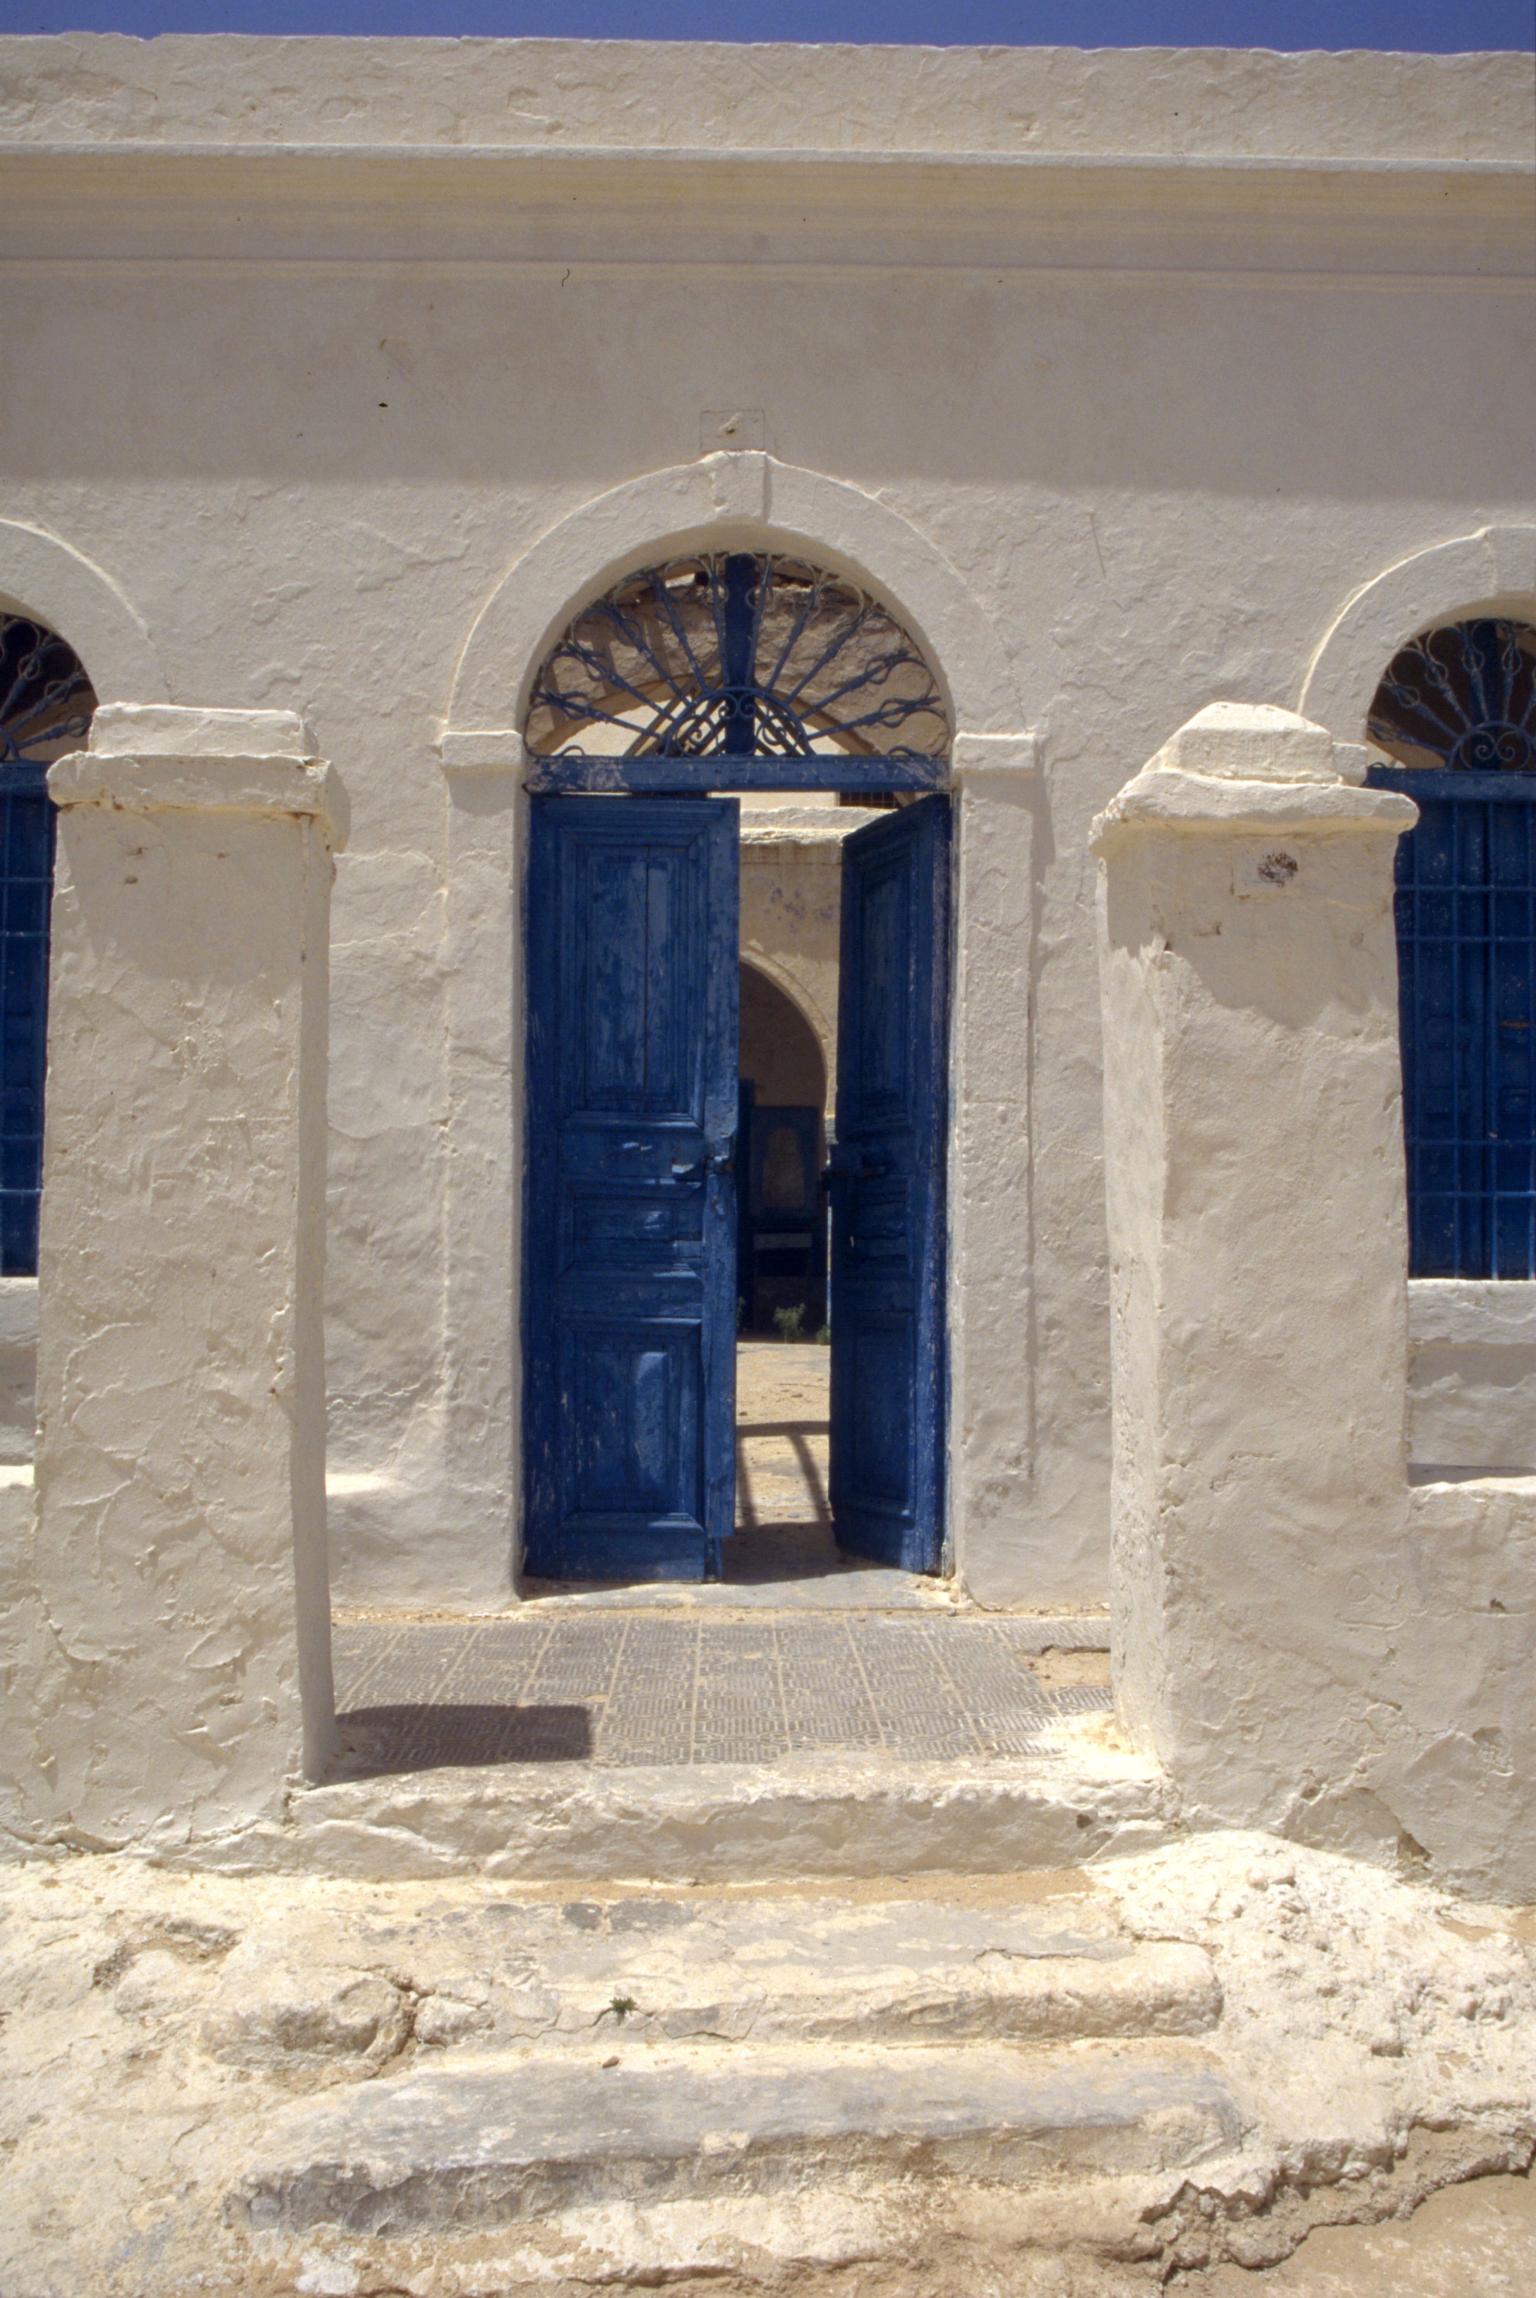 Building exterior with stone columns on either side of an open, arched doorway. 